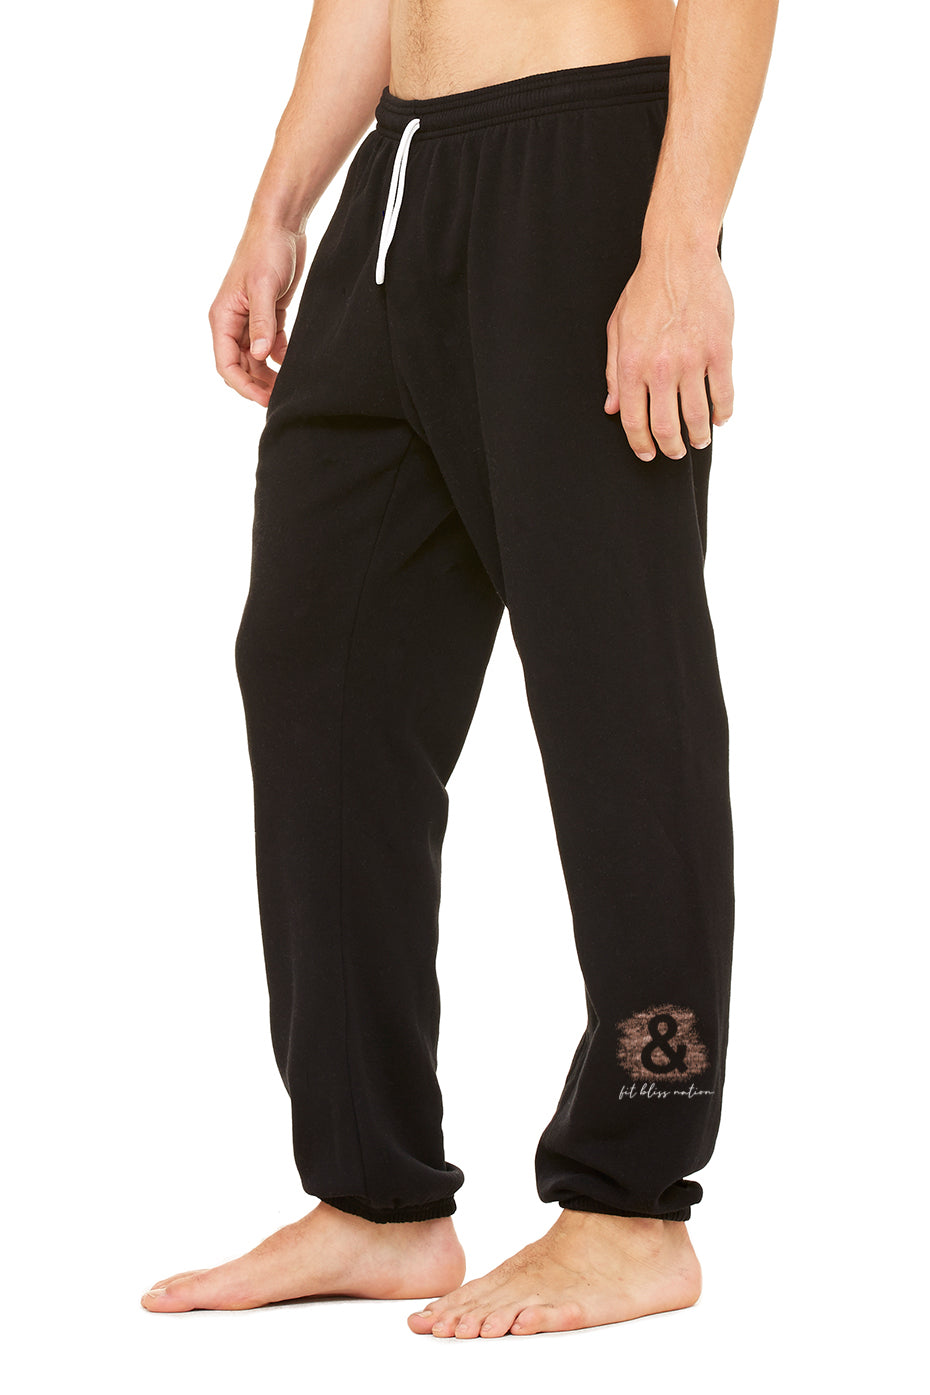 FIT BLISS NATION JOGGERS